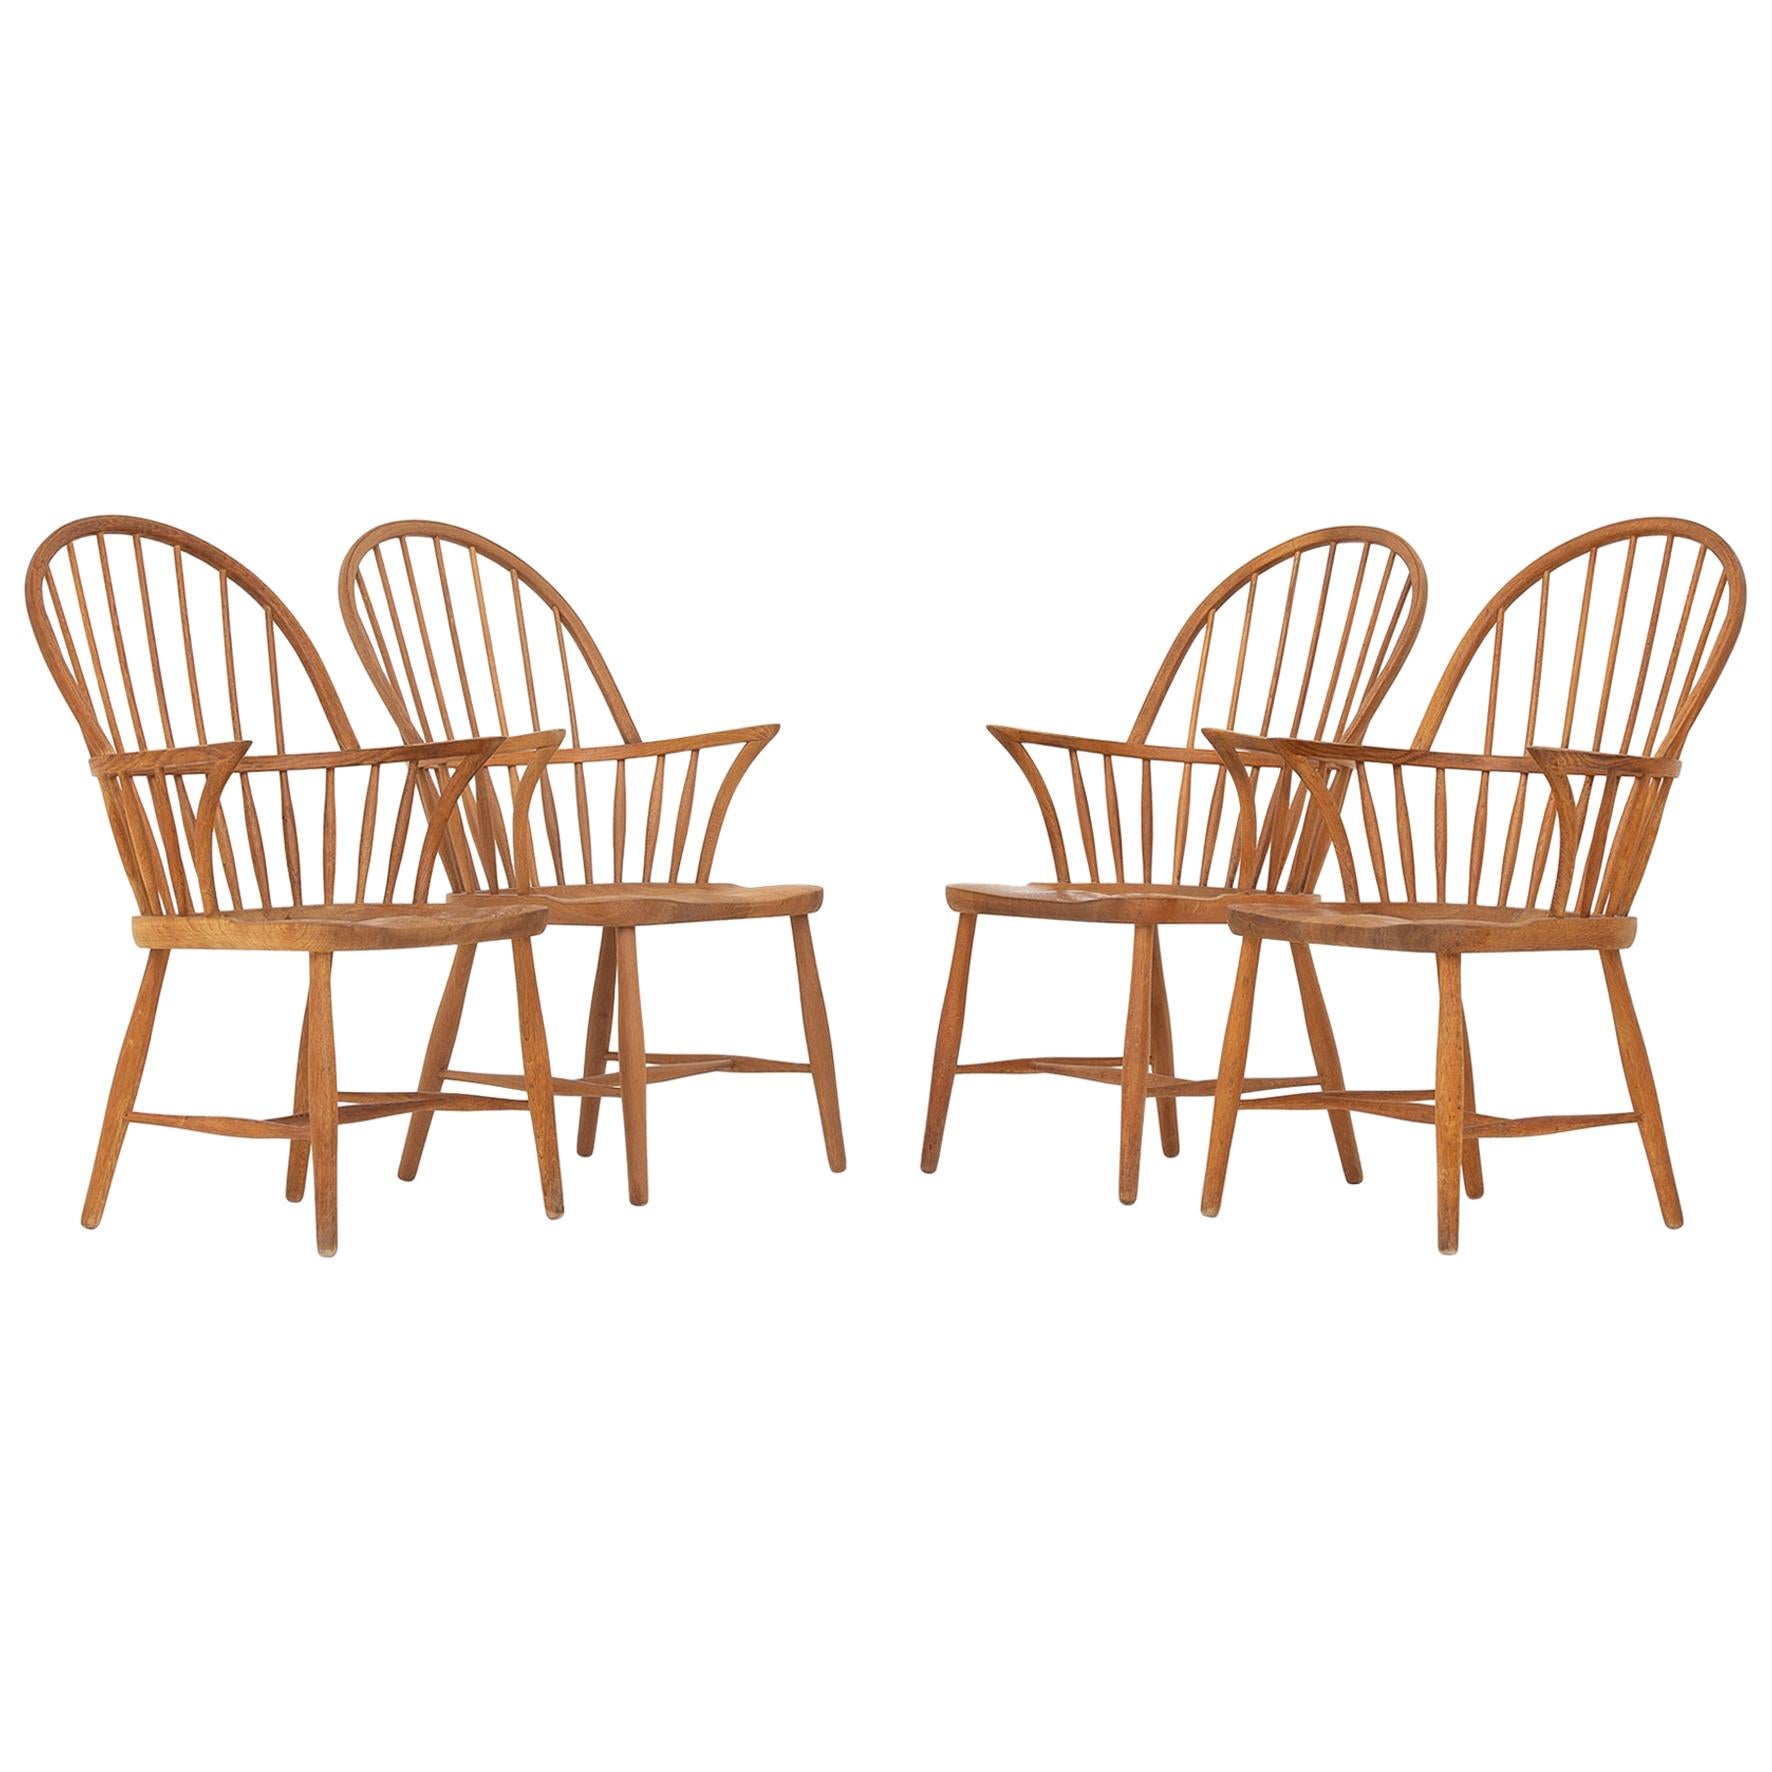 Set of Four Windsor Chairs by Frits Henningsen